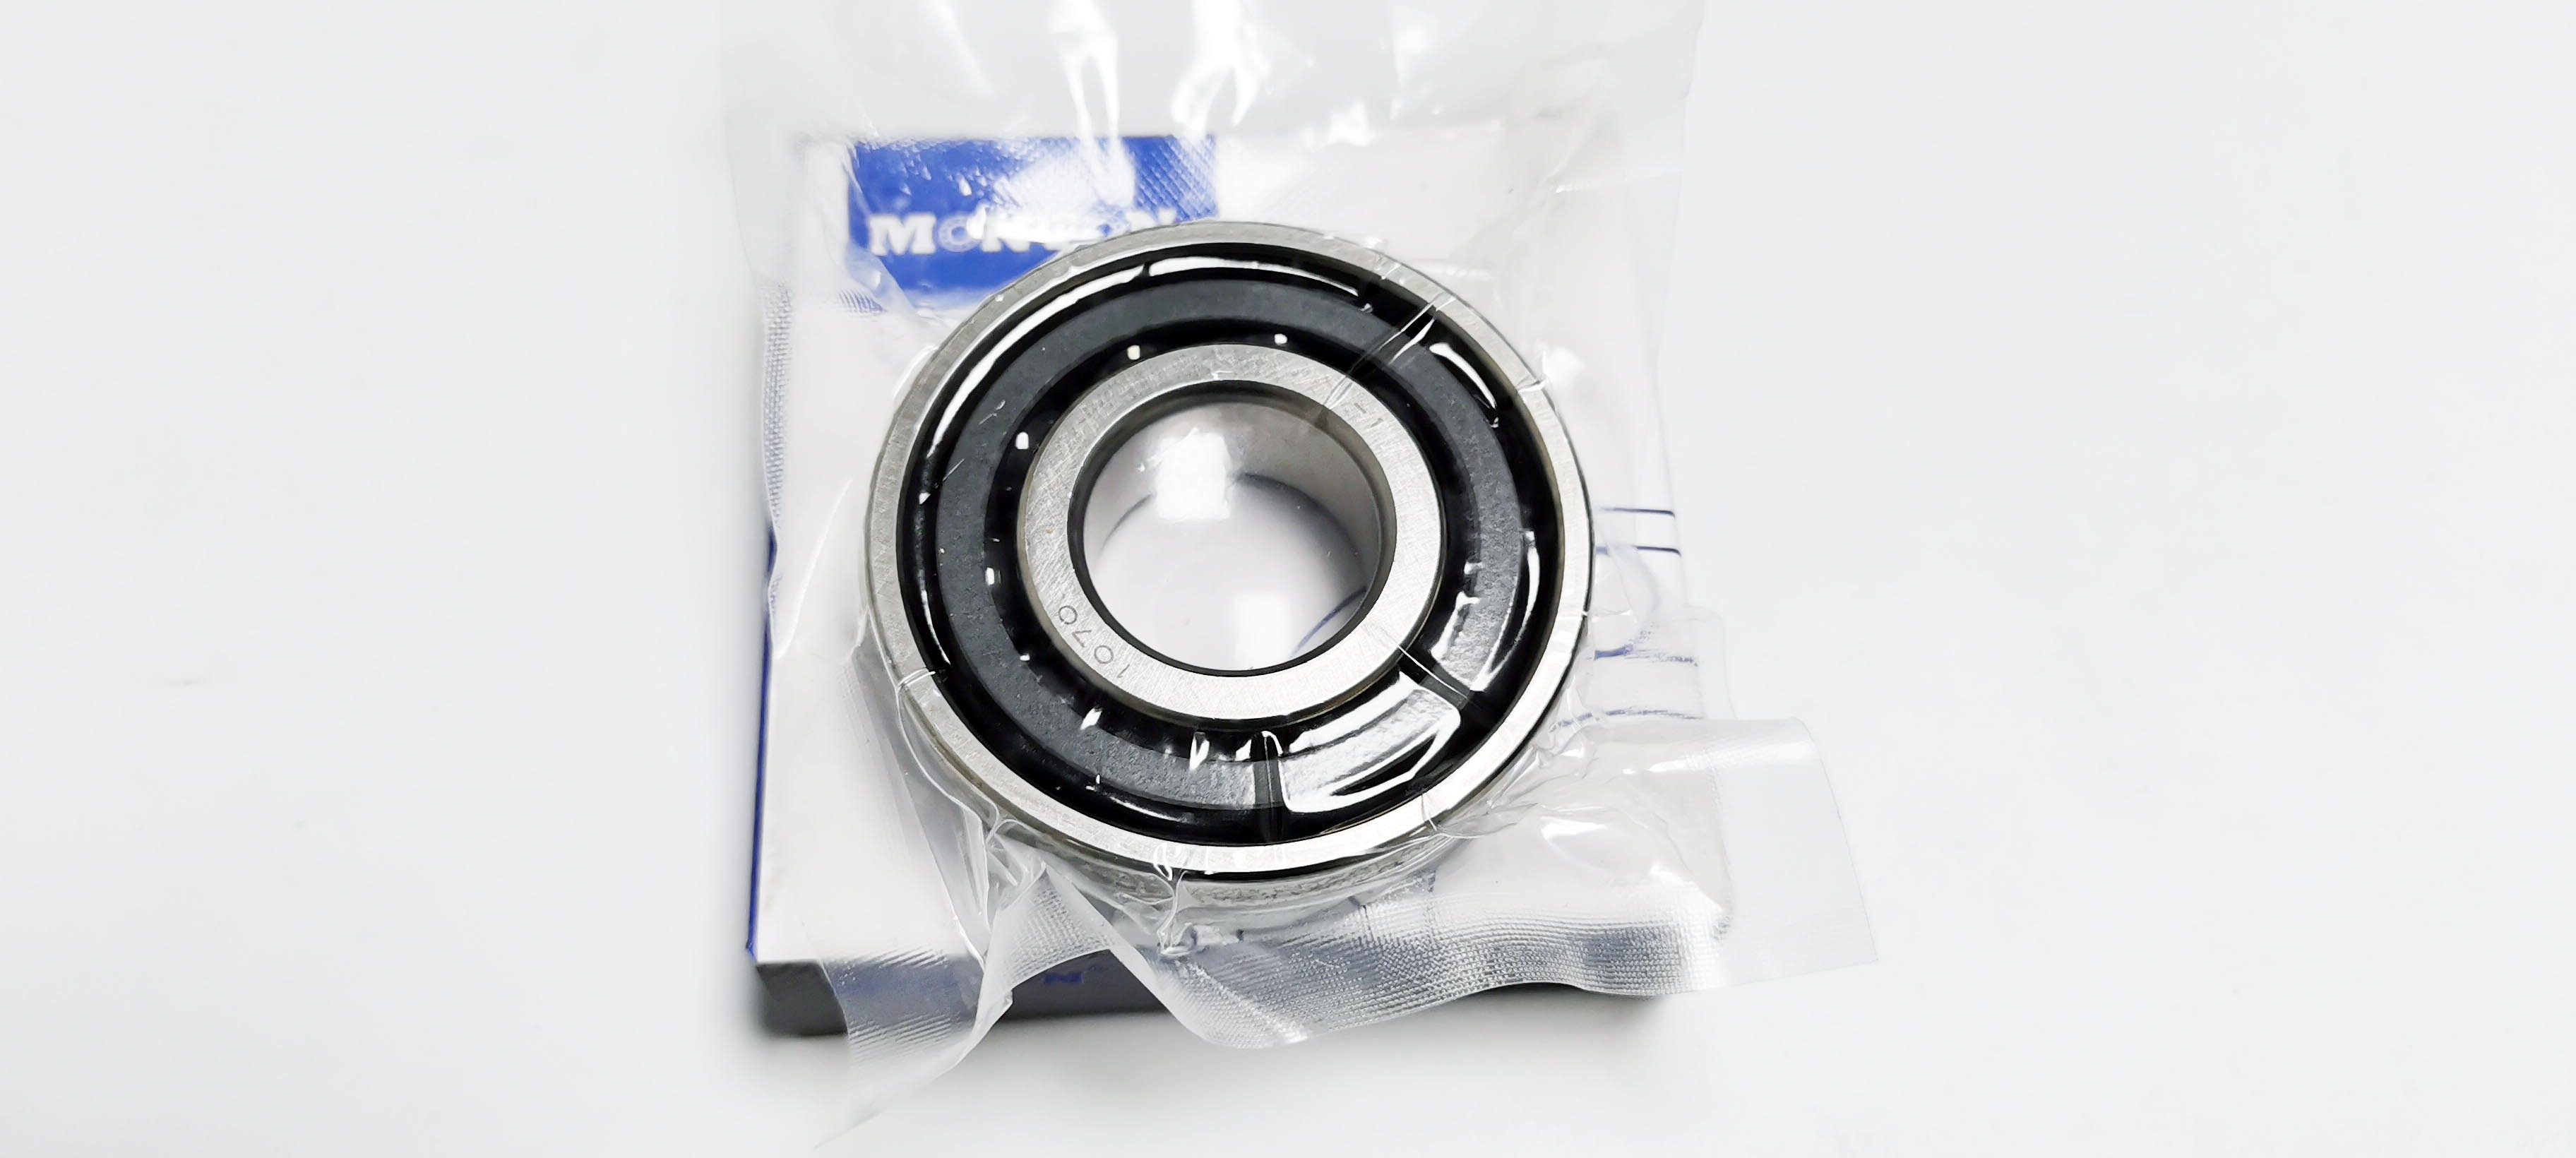 MTS6320PTSN low temperature bearing for Cryogenic pump